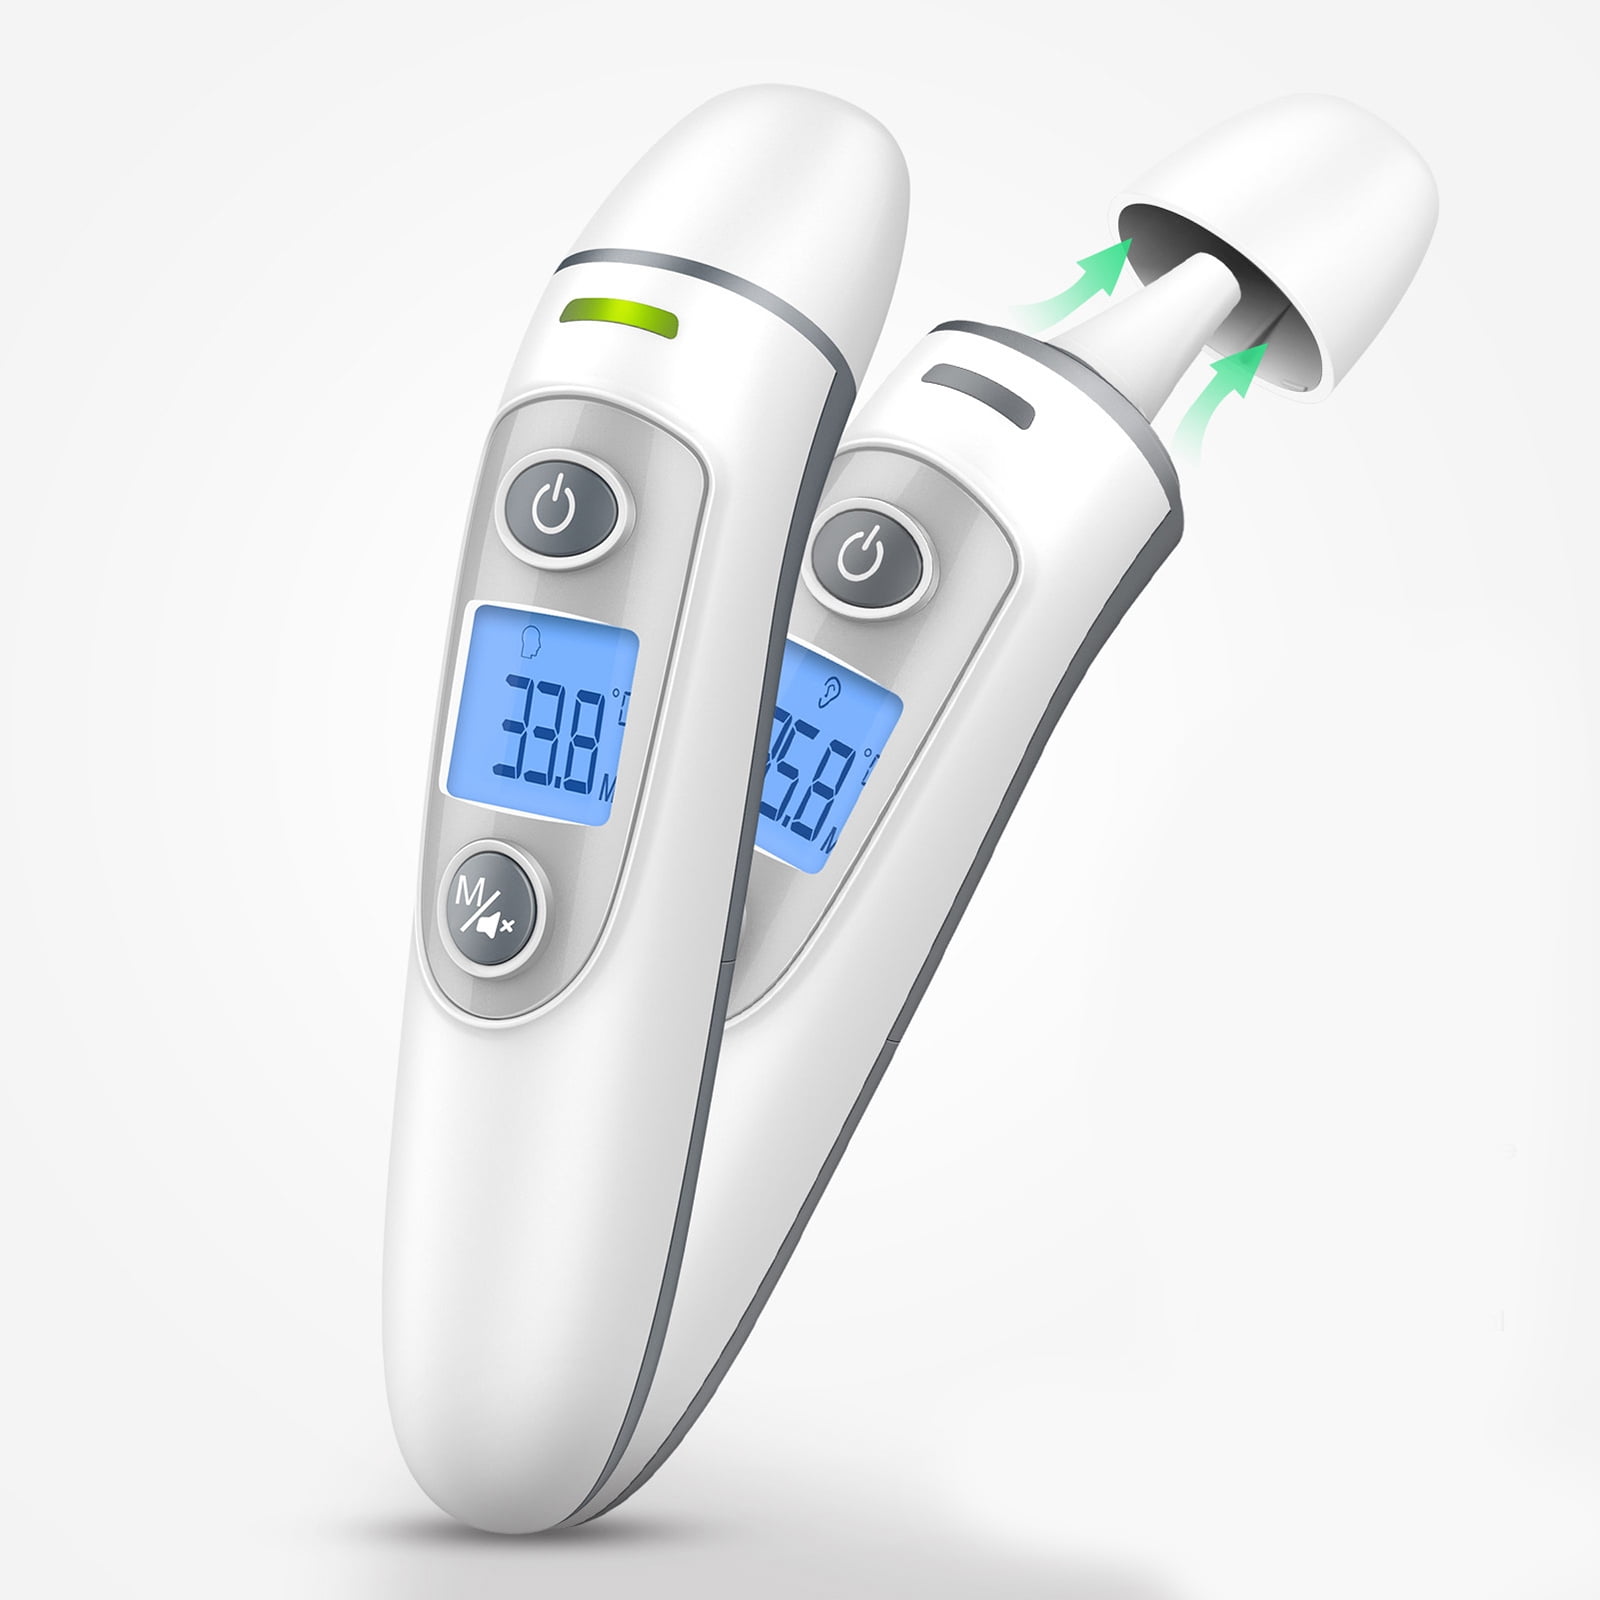 No Touch Non-Contact Forehead Digital Thermometer By iHealth Home Medical Level